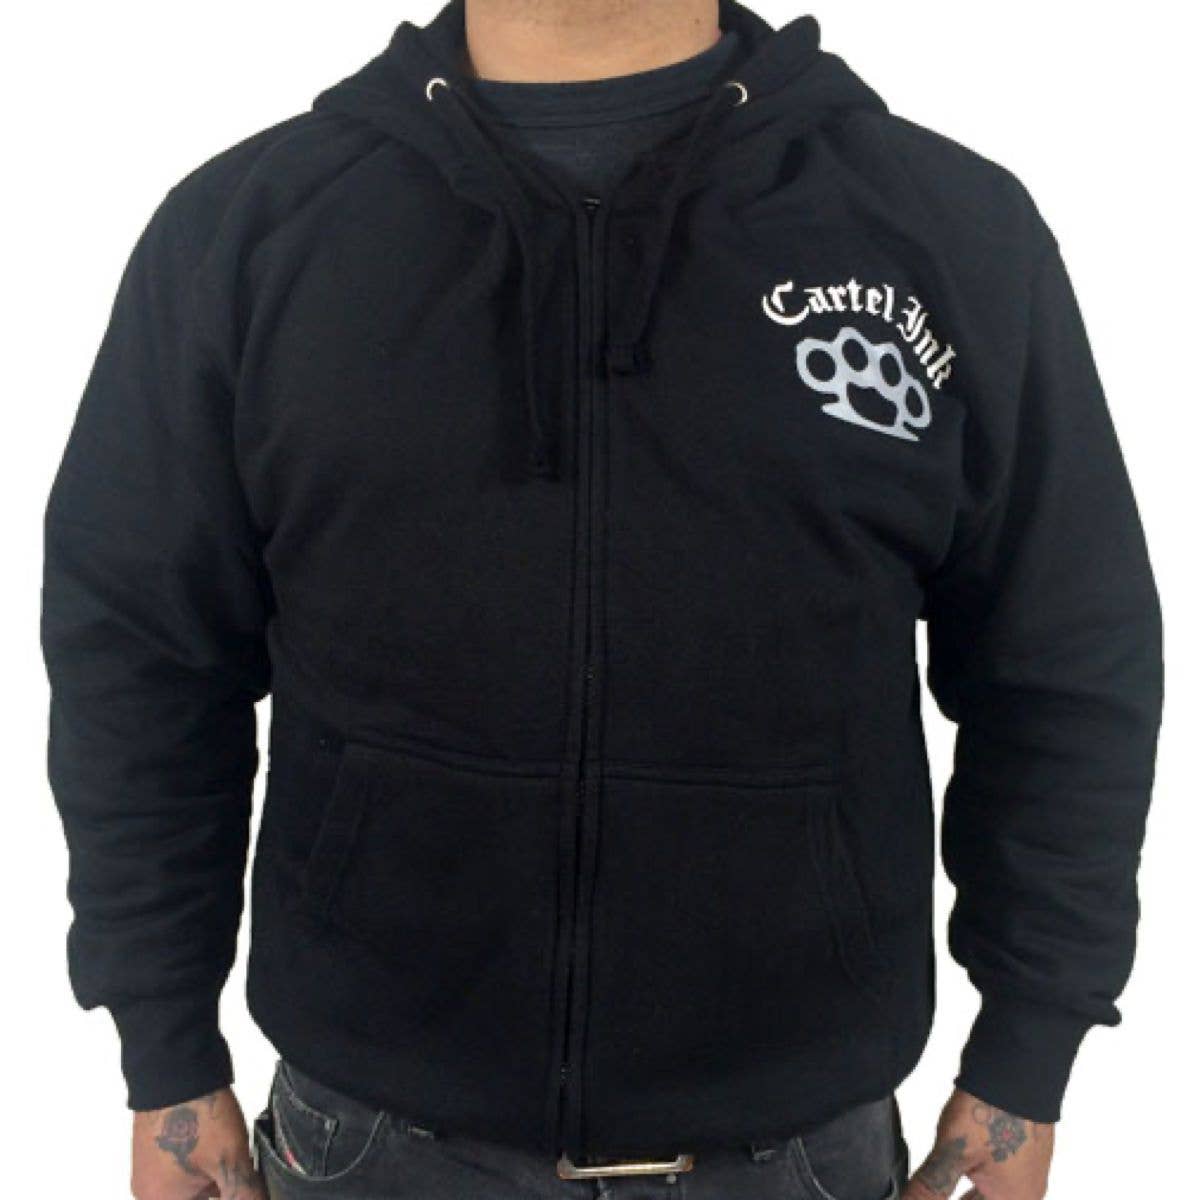 Cartel Ink - 6002-BLACK WHITE | Cartel Ink Born To Rumble (Knuckles): Black White / XL - - Synik Clothing - synikclothing.com